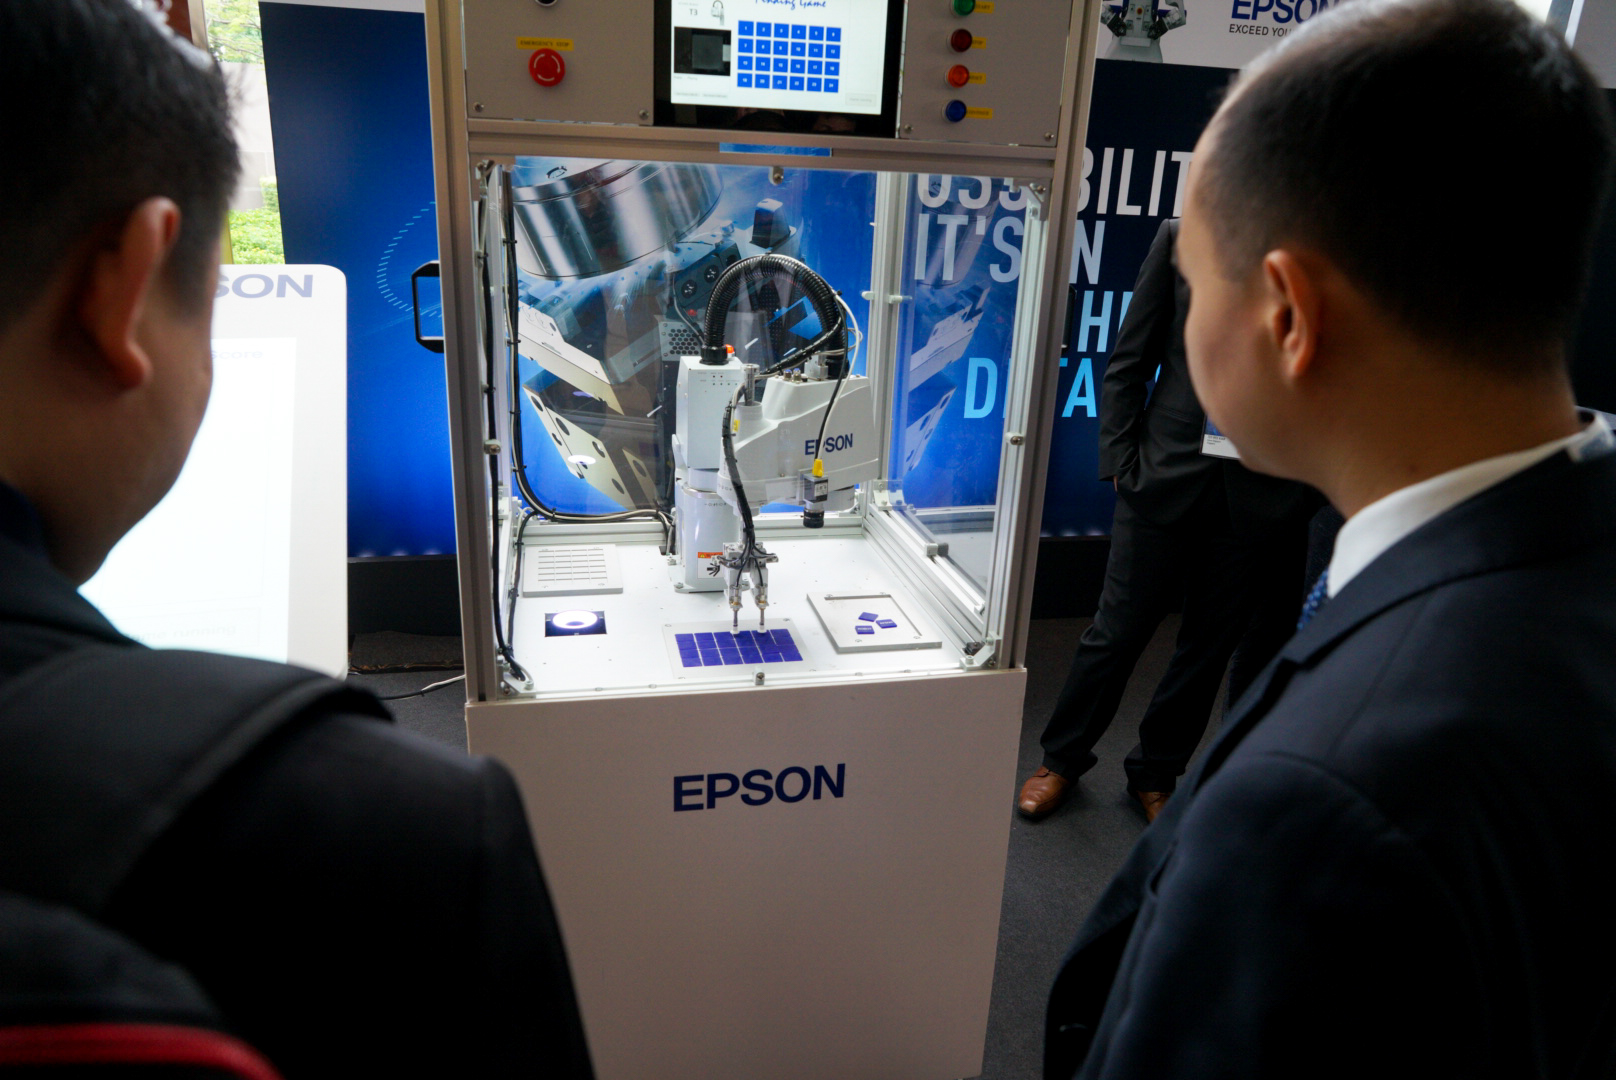 Epson Singapore to boost enterprise and business segments